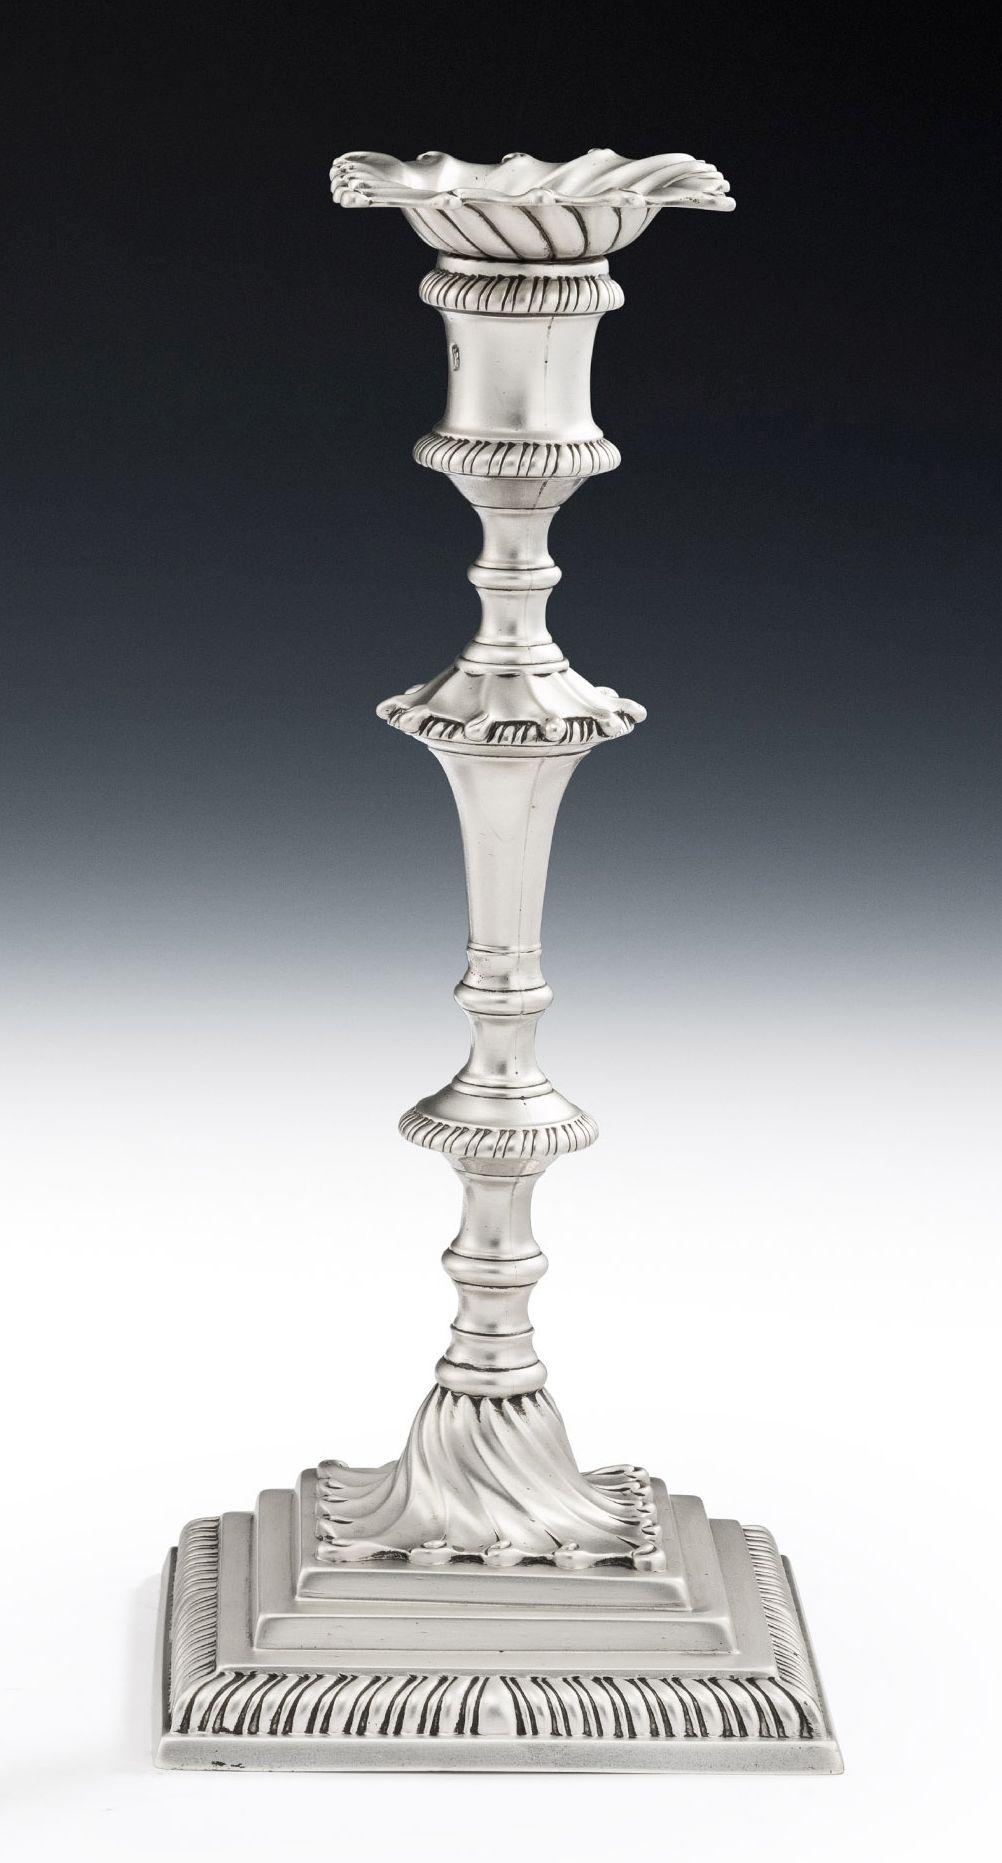 British Pair of George III Cast Candlesticks Made in London in 1771 by Ebenezer Coker For Sale